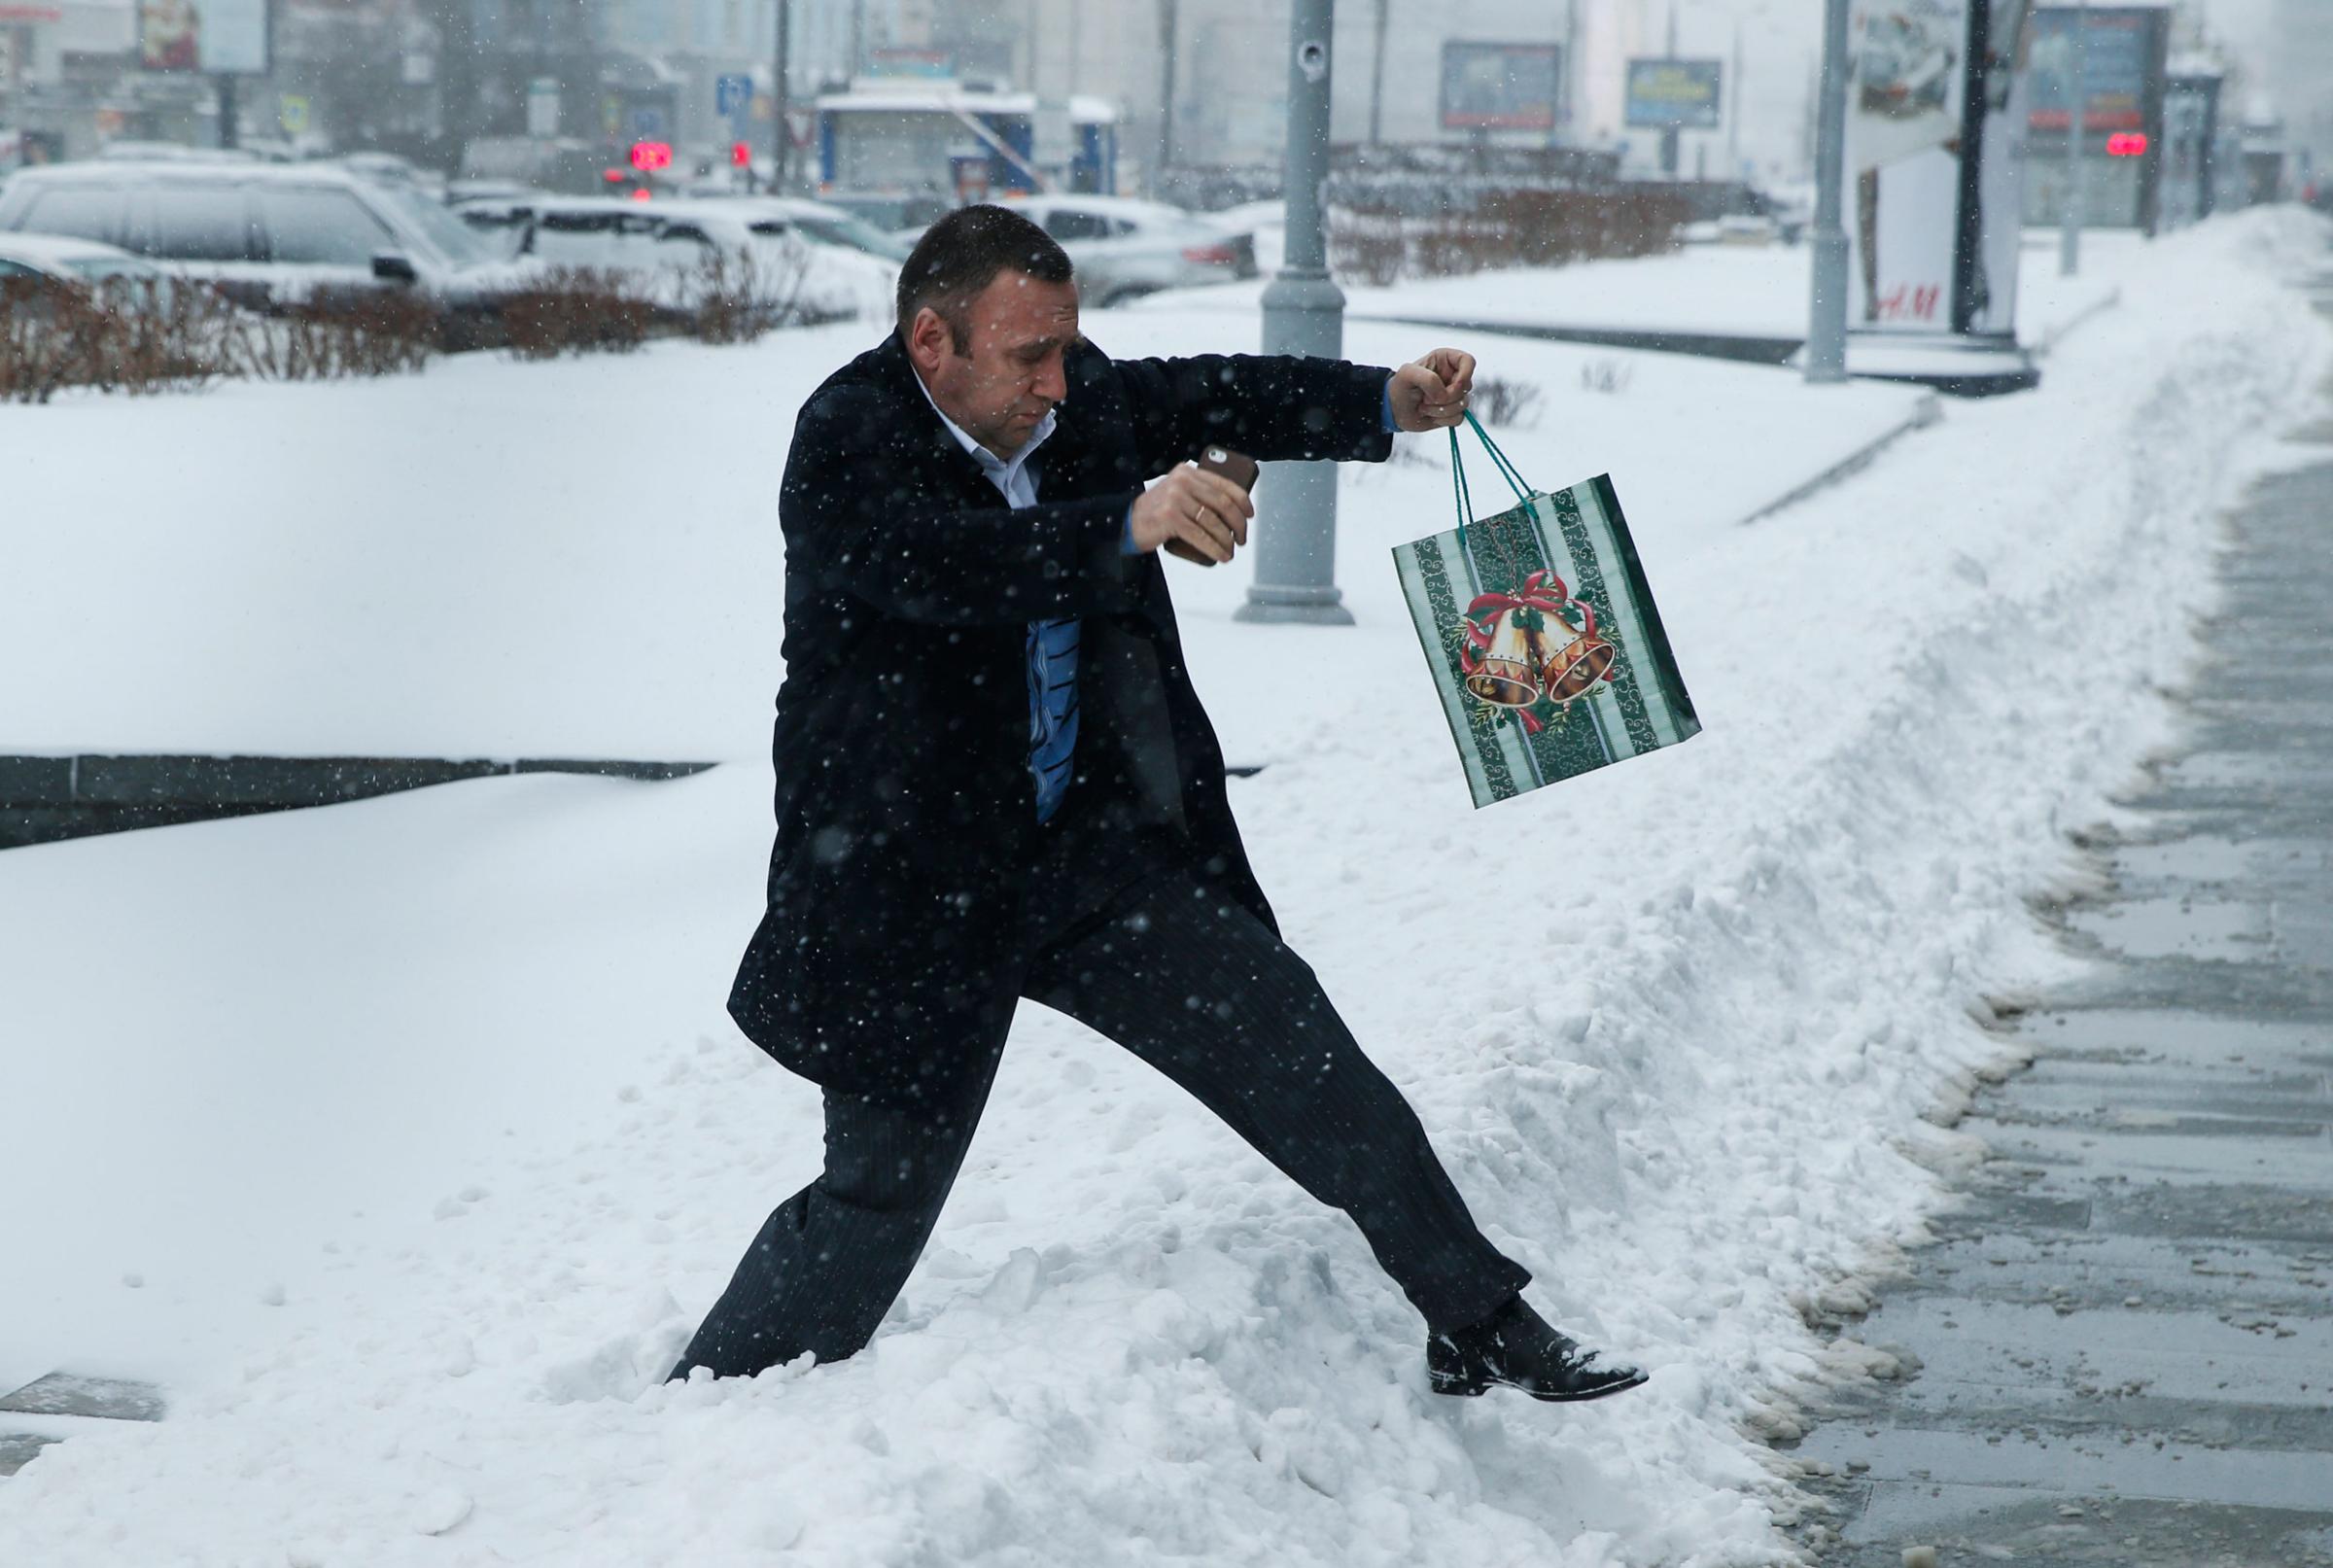 A man with a Christmas gift walks across snow during heavy snowfall in downtown Moscow on Dec. 25, 2014.